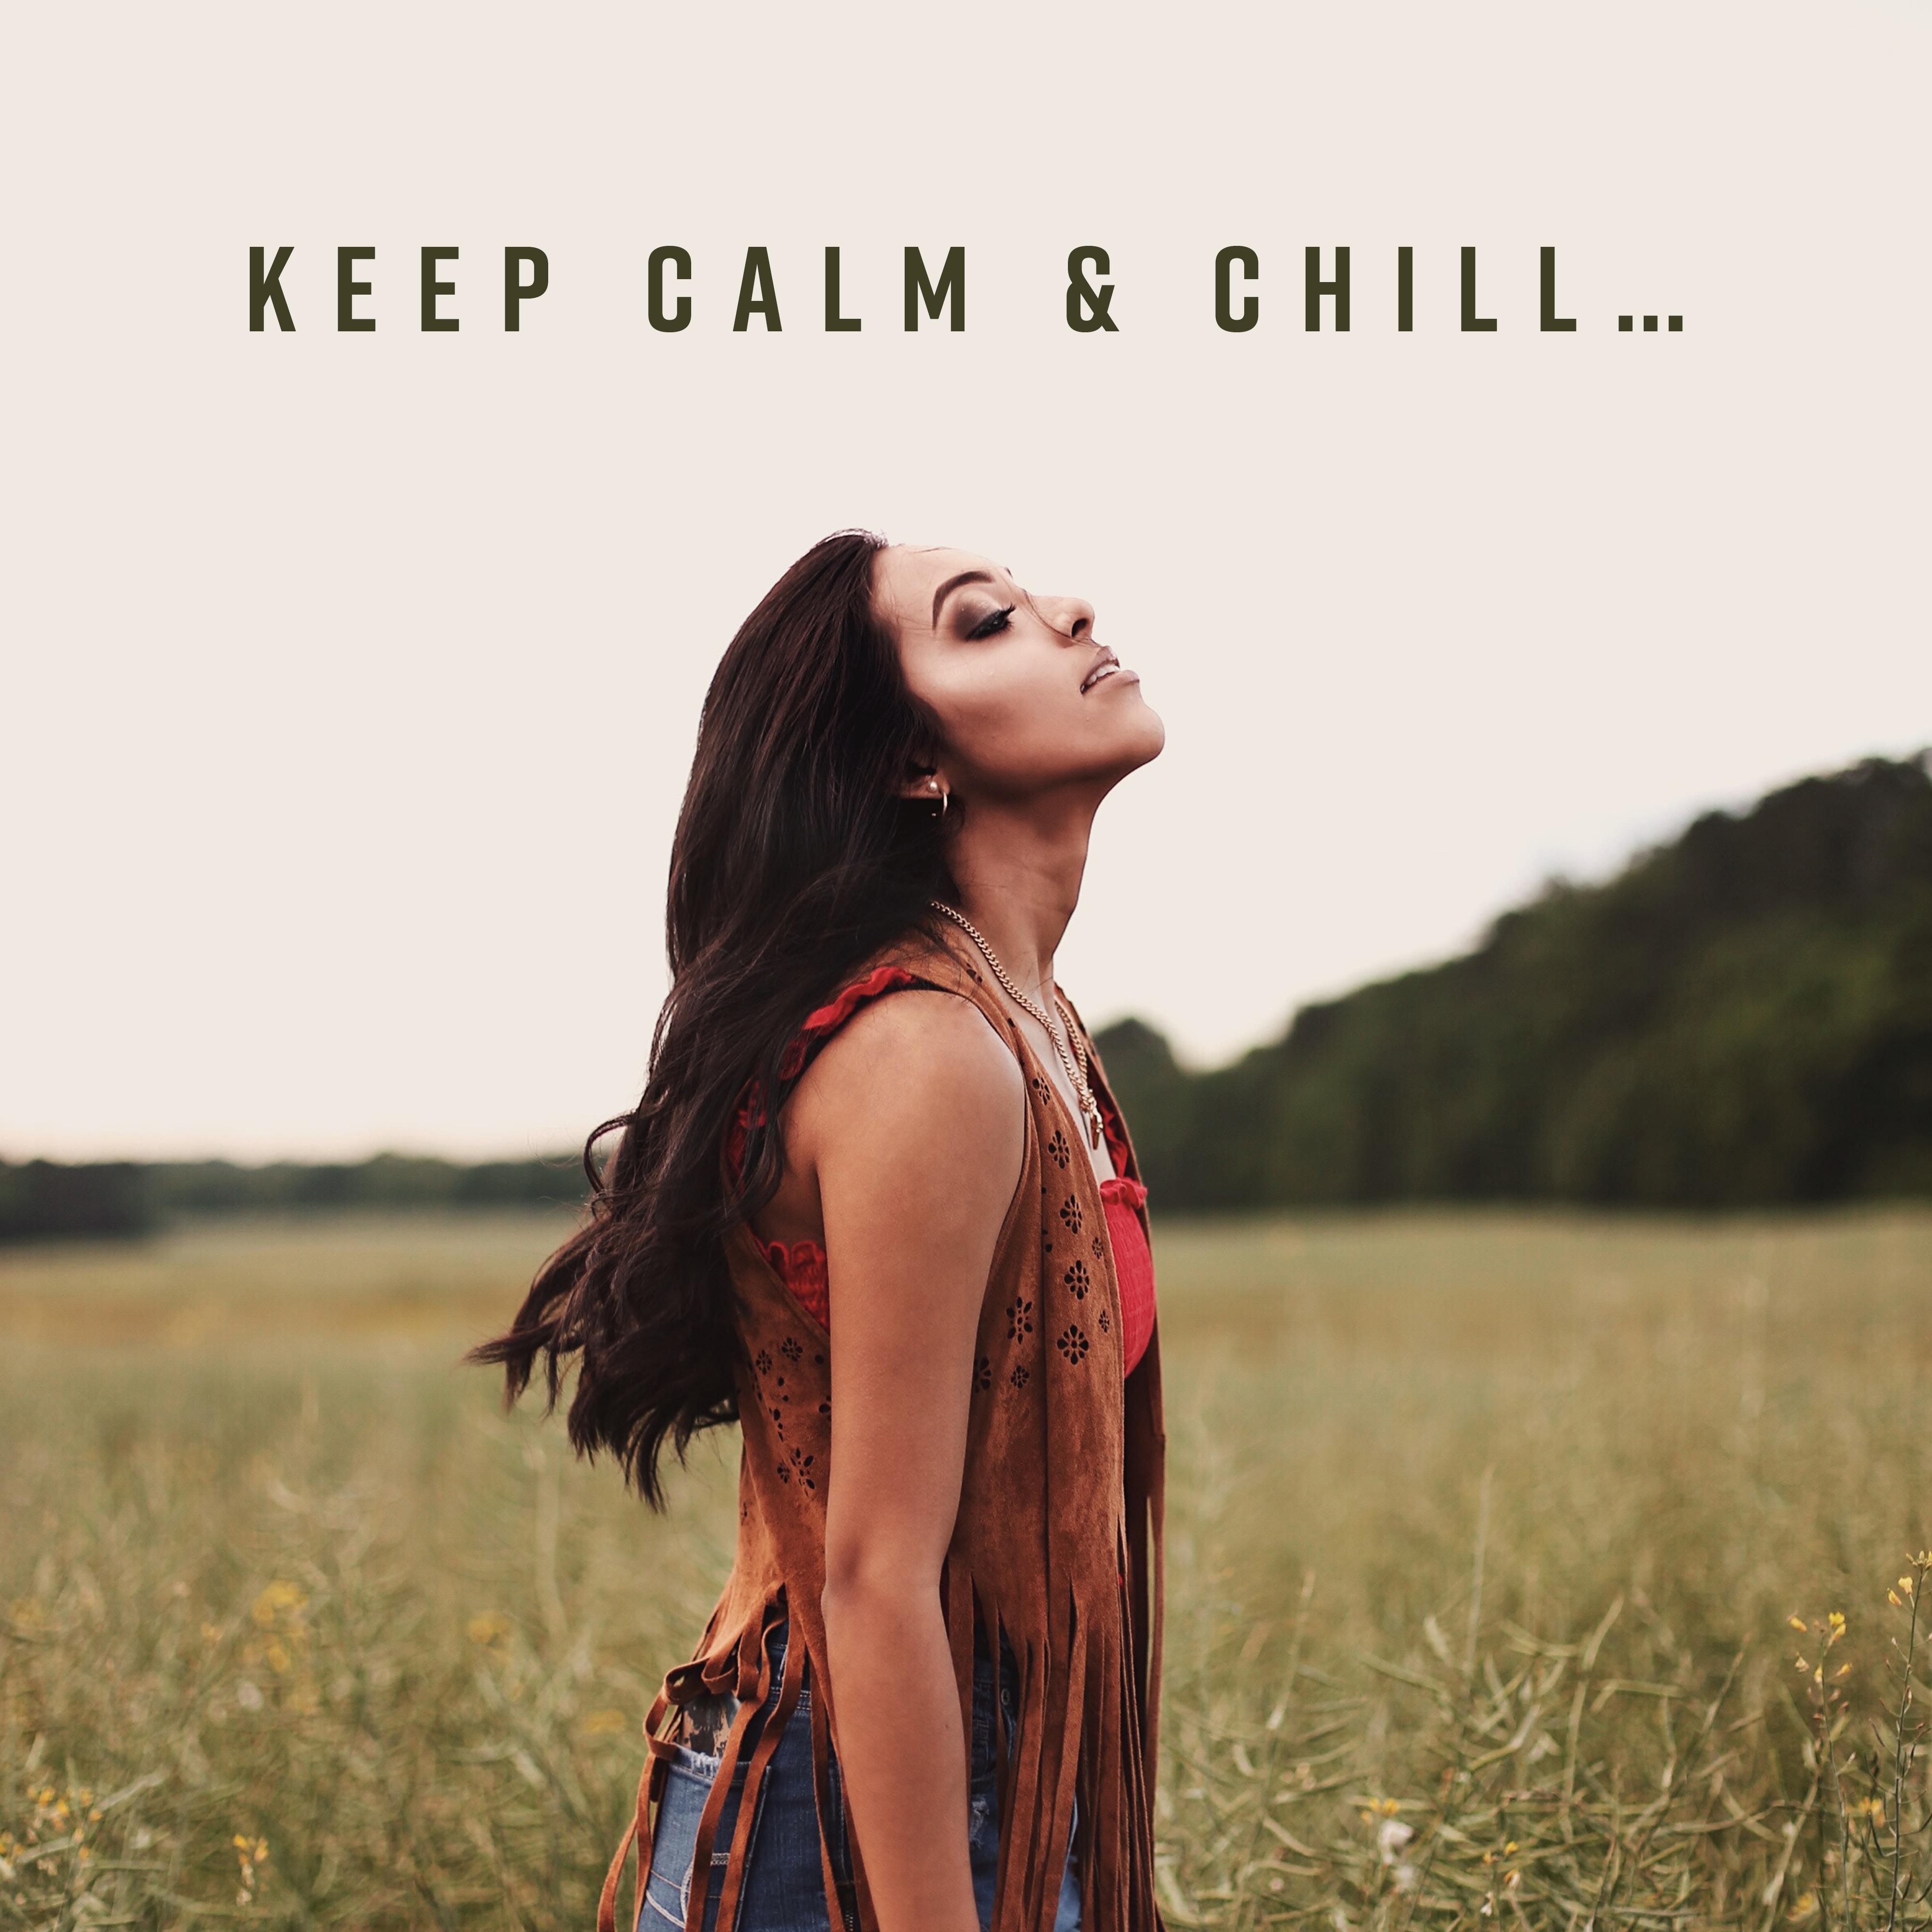 Keep Calm  Chill  Chillout Vacation Music 2019, Best Sounds of Relaxation, Deep Beats  Soft Ambient Vibes, Tropical Holidays Perfect Time